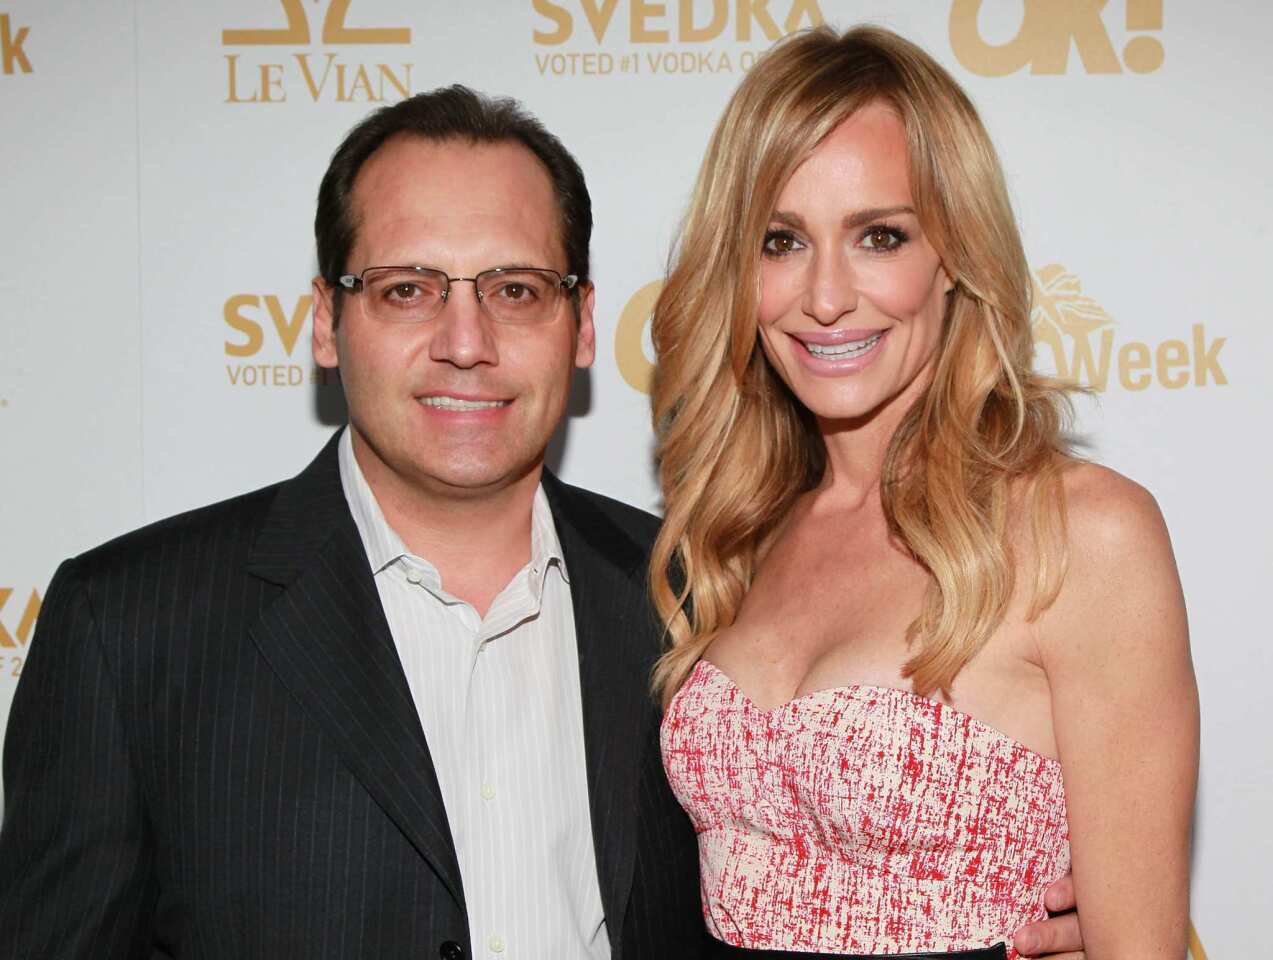 Taylor Armstrong's public mourning